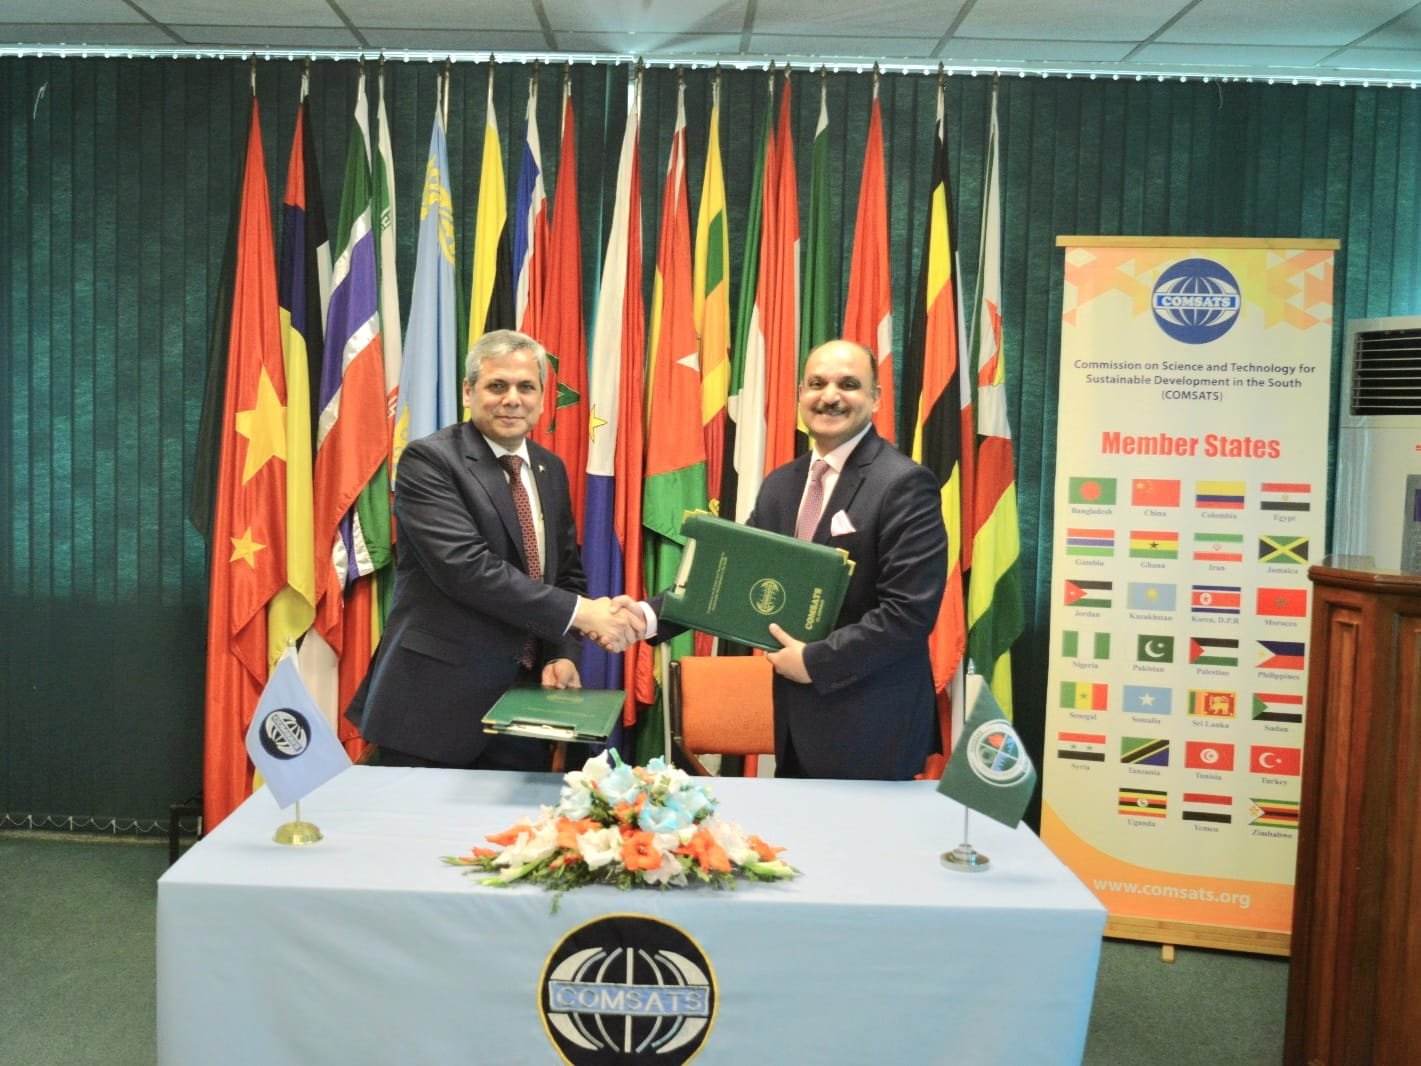 COMSATS, NIDM Join Forces to Bolster Climate Resilience in Pakistan